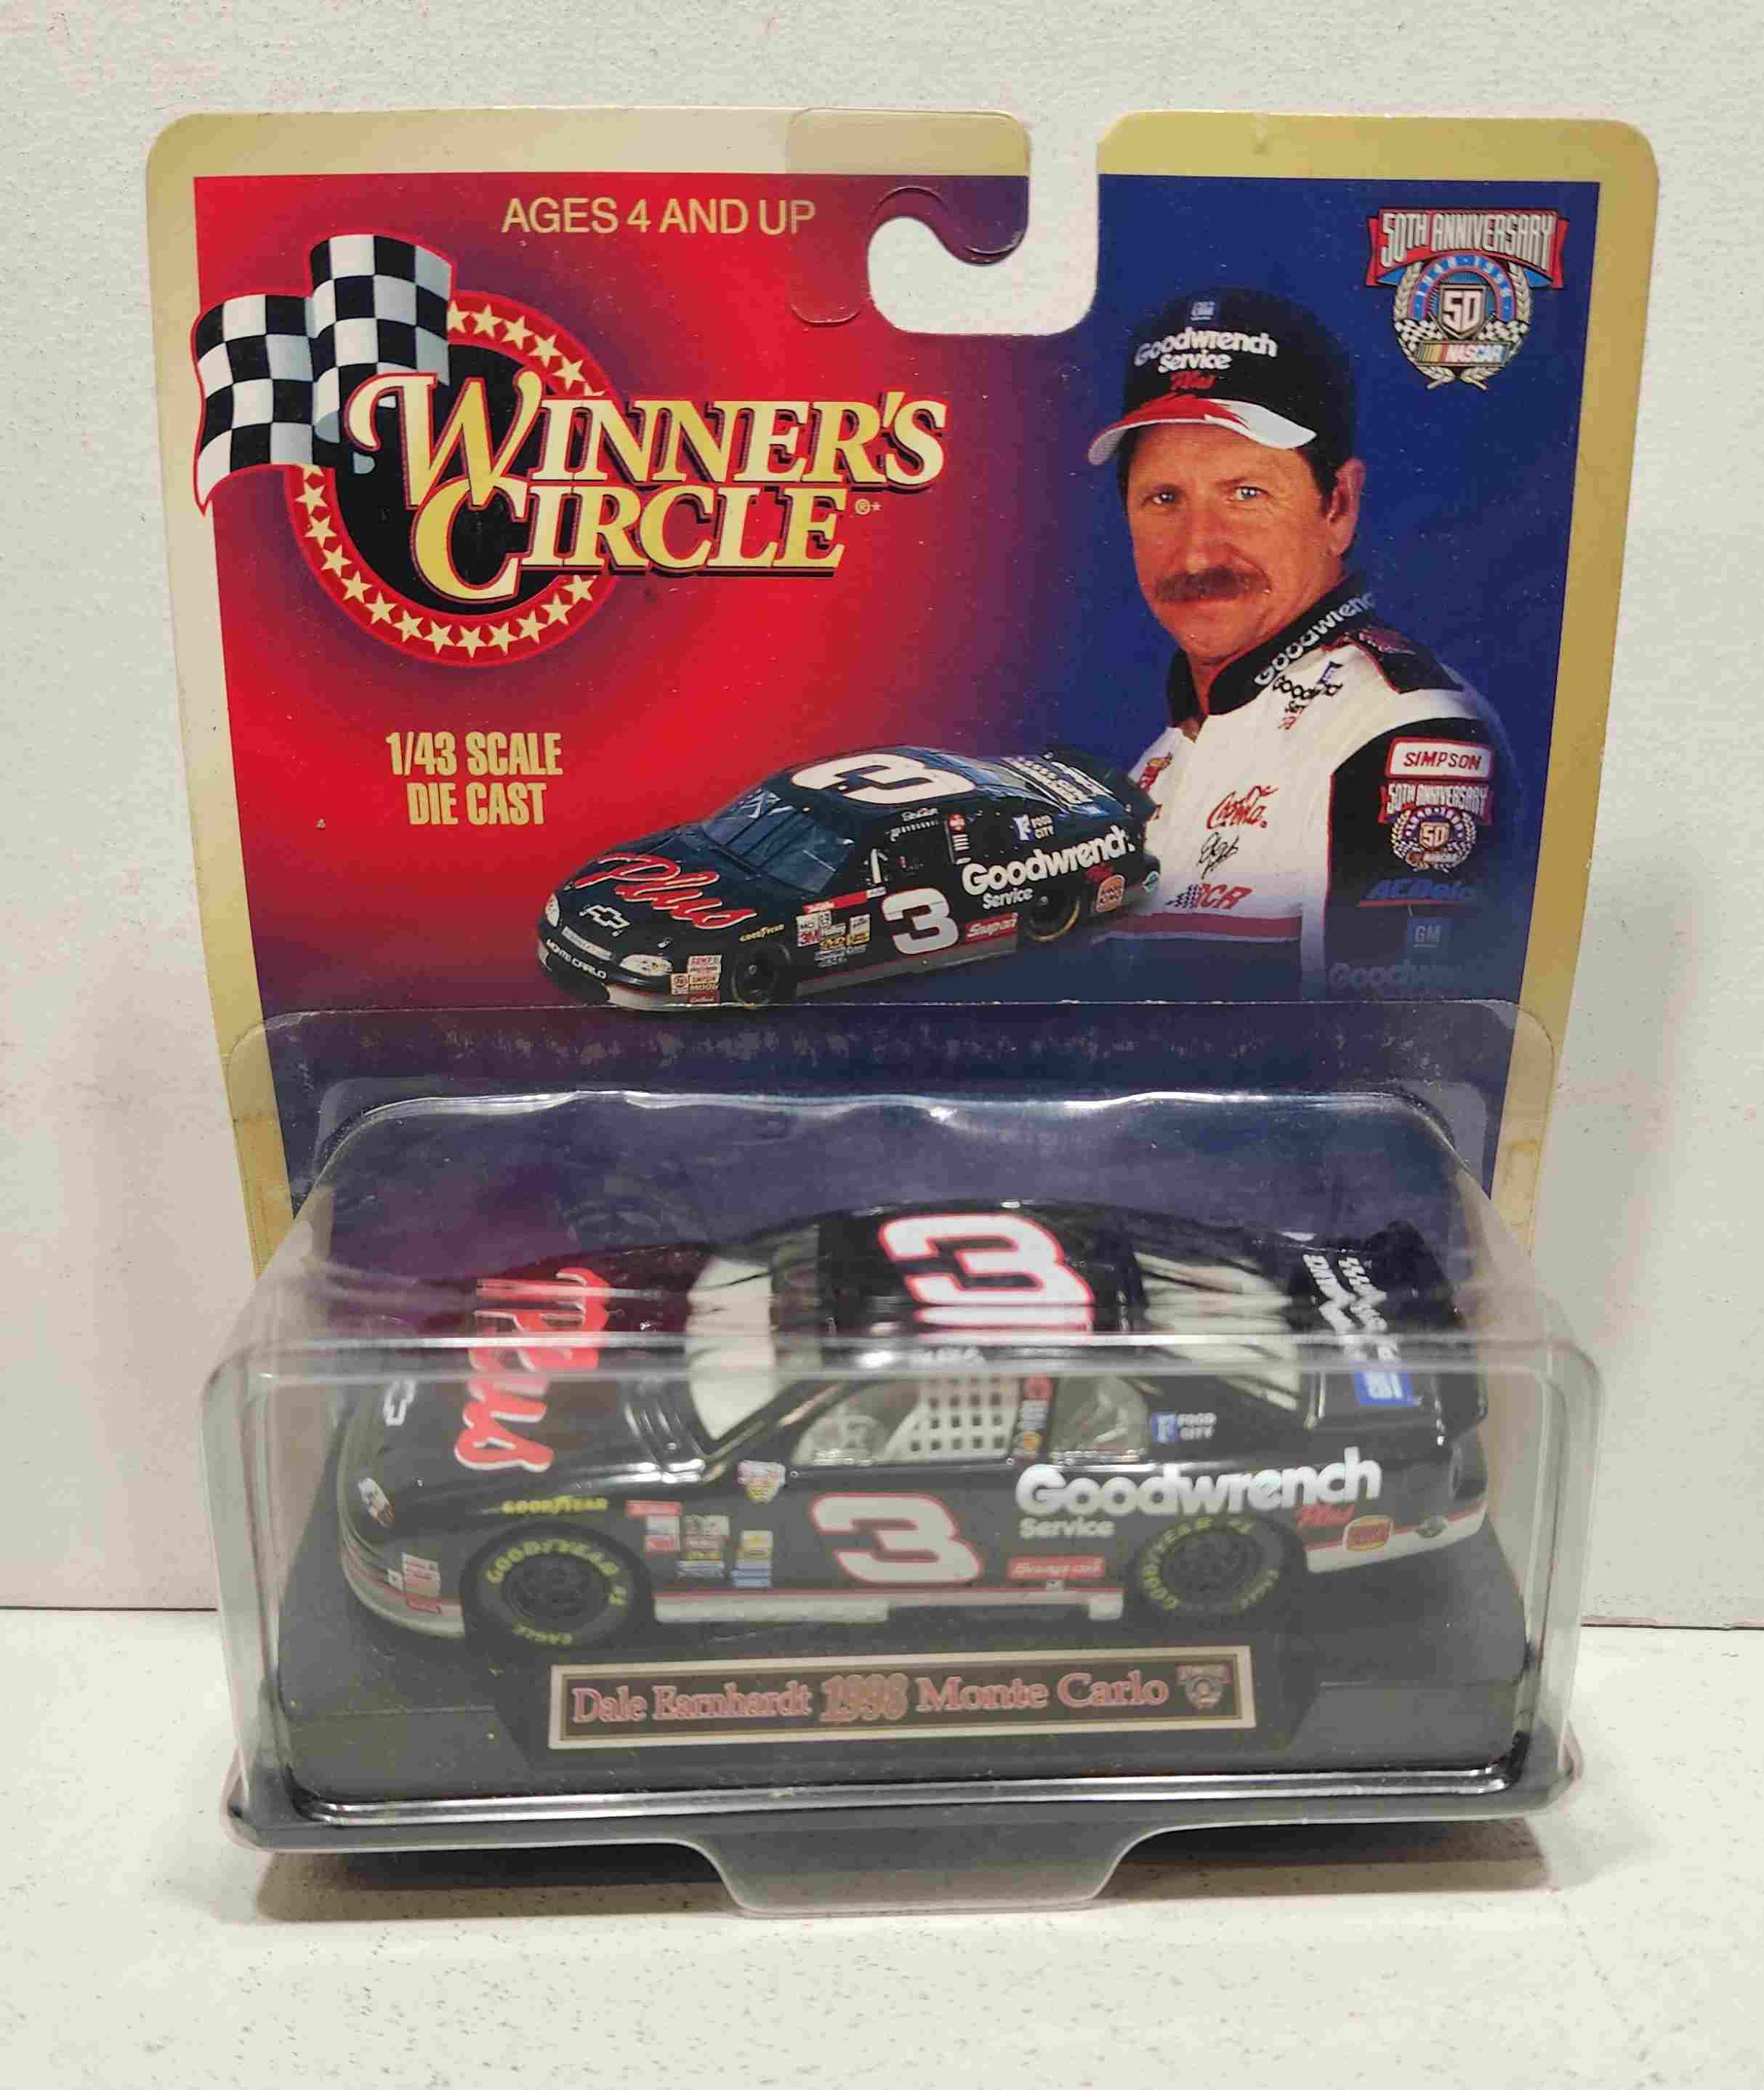 1998 Dale Earnhardt 1/43rd Goodwrench Monte Carlo